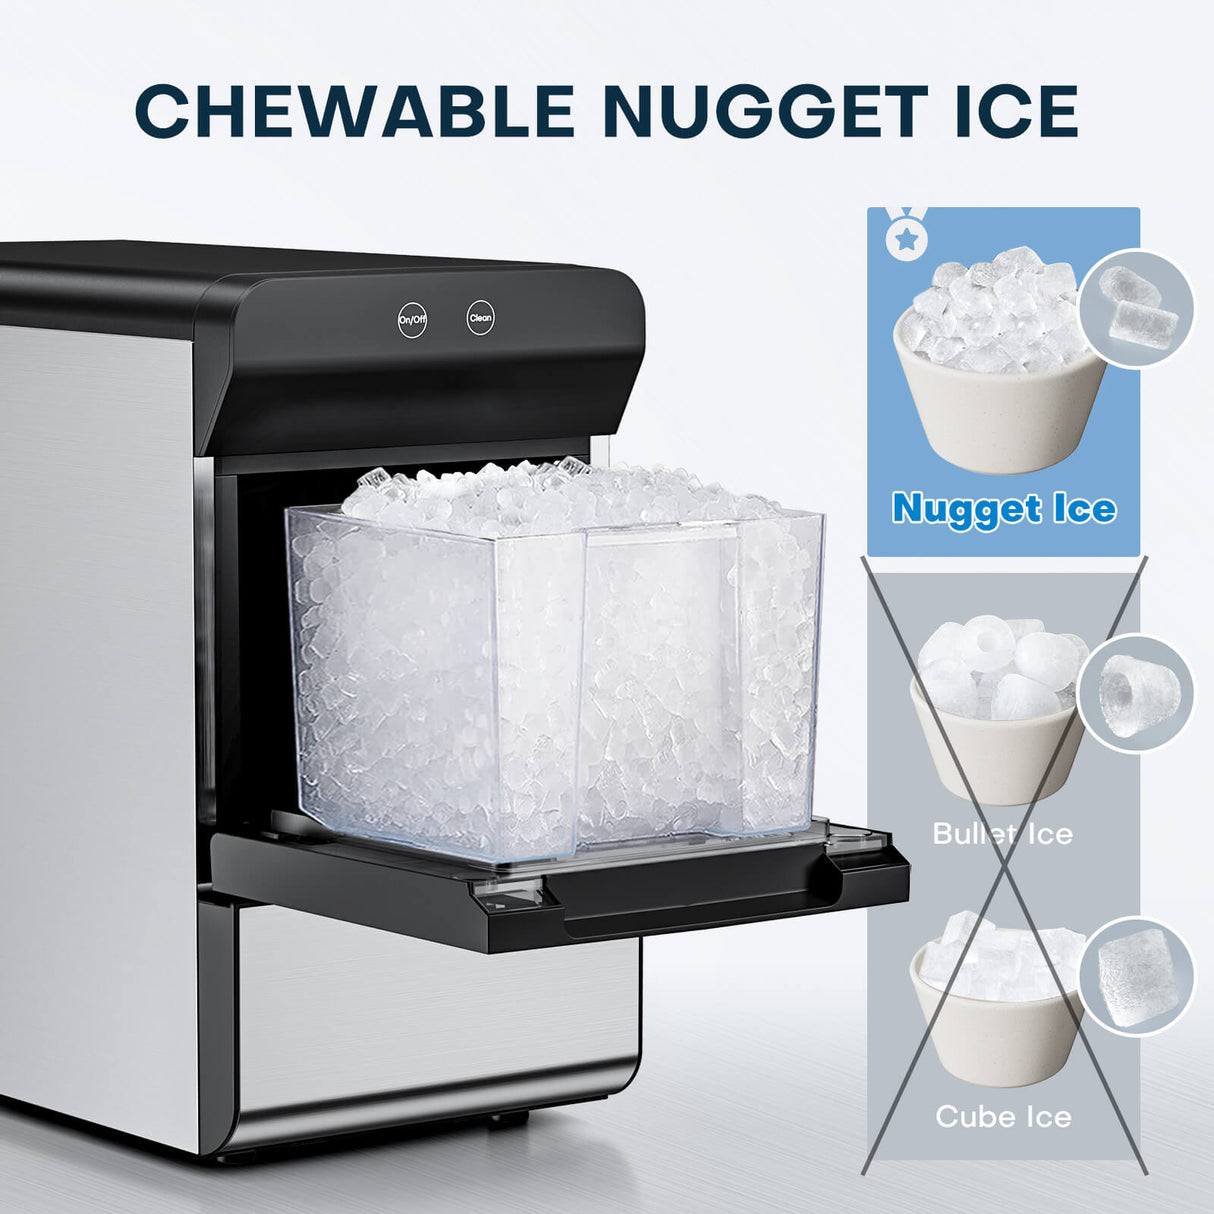 X90 Pro Nugget Ice Maker Countertop, Perfect for family use